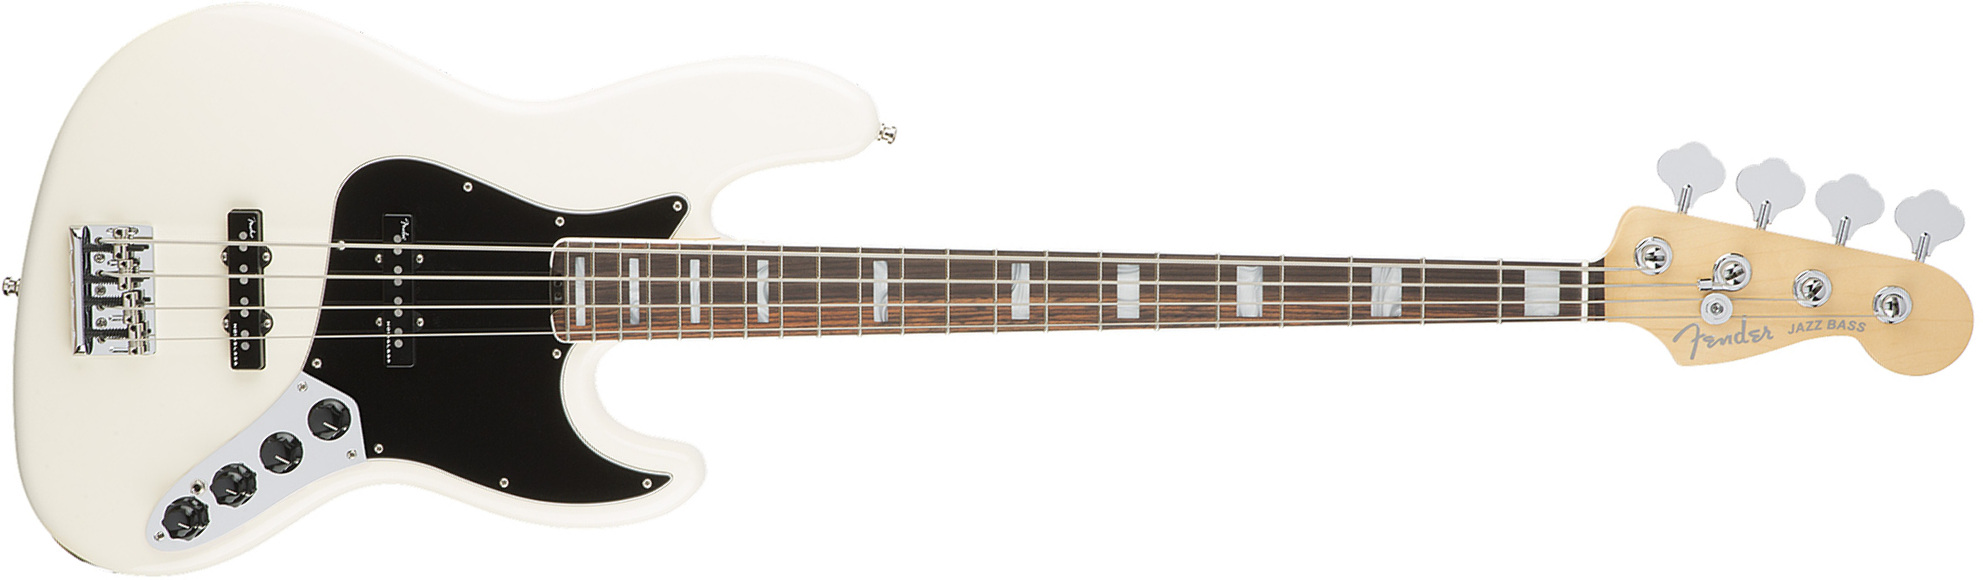 Fender Jazz Bass American Elite 2016 Usa Rw - Olympic White - Basse Électrique Solid Body - Main picture